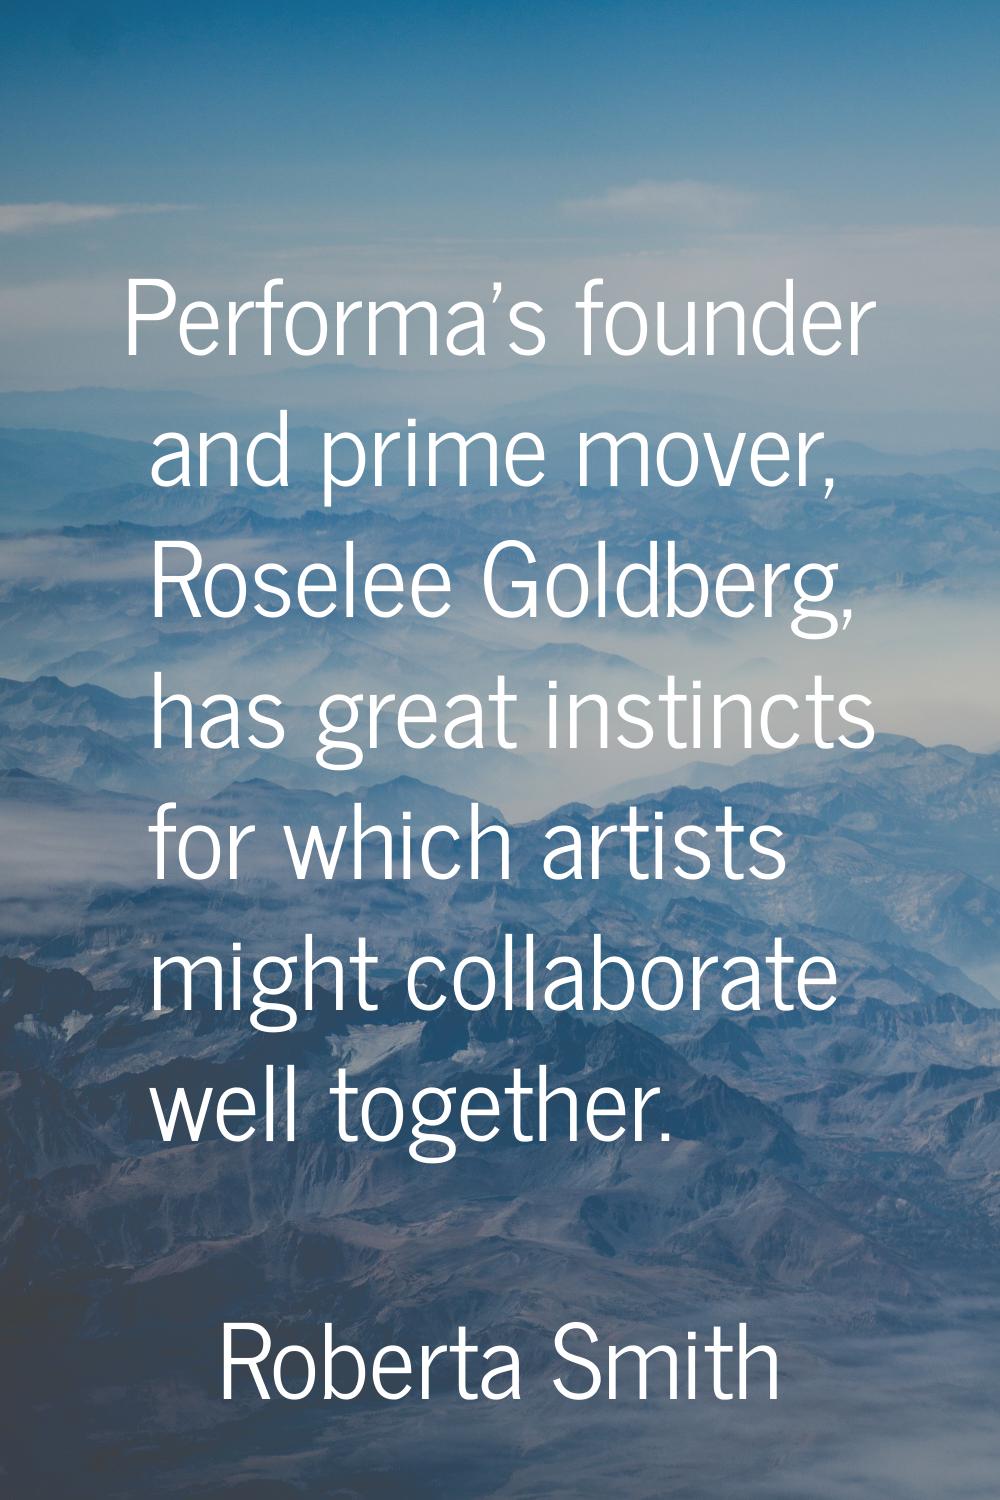 Performa's founder and prime mover, Roselee Goldberg, has great instincts for which artists might c